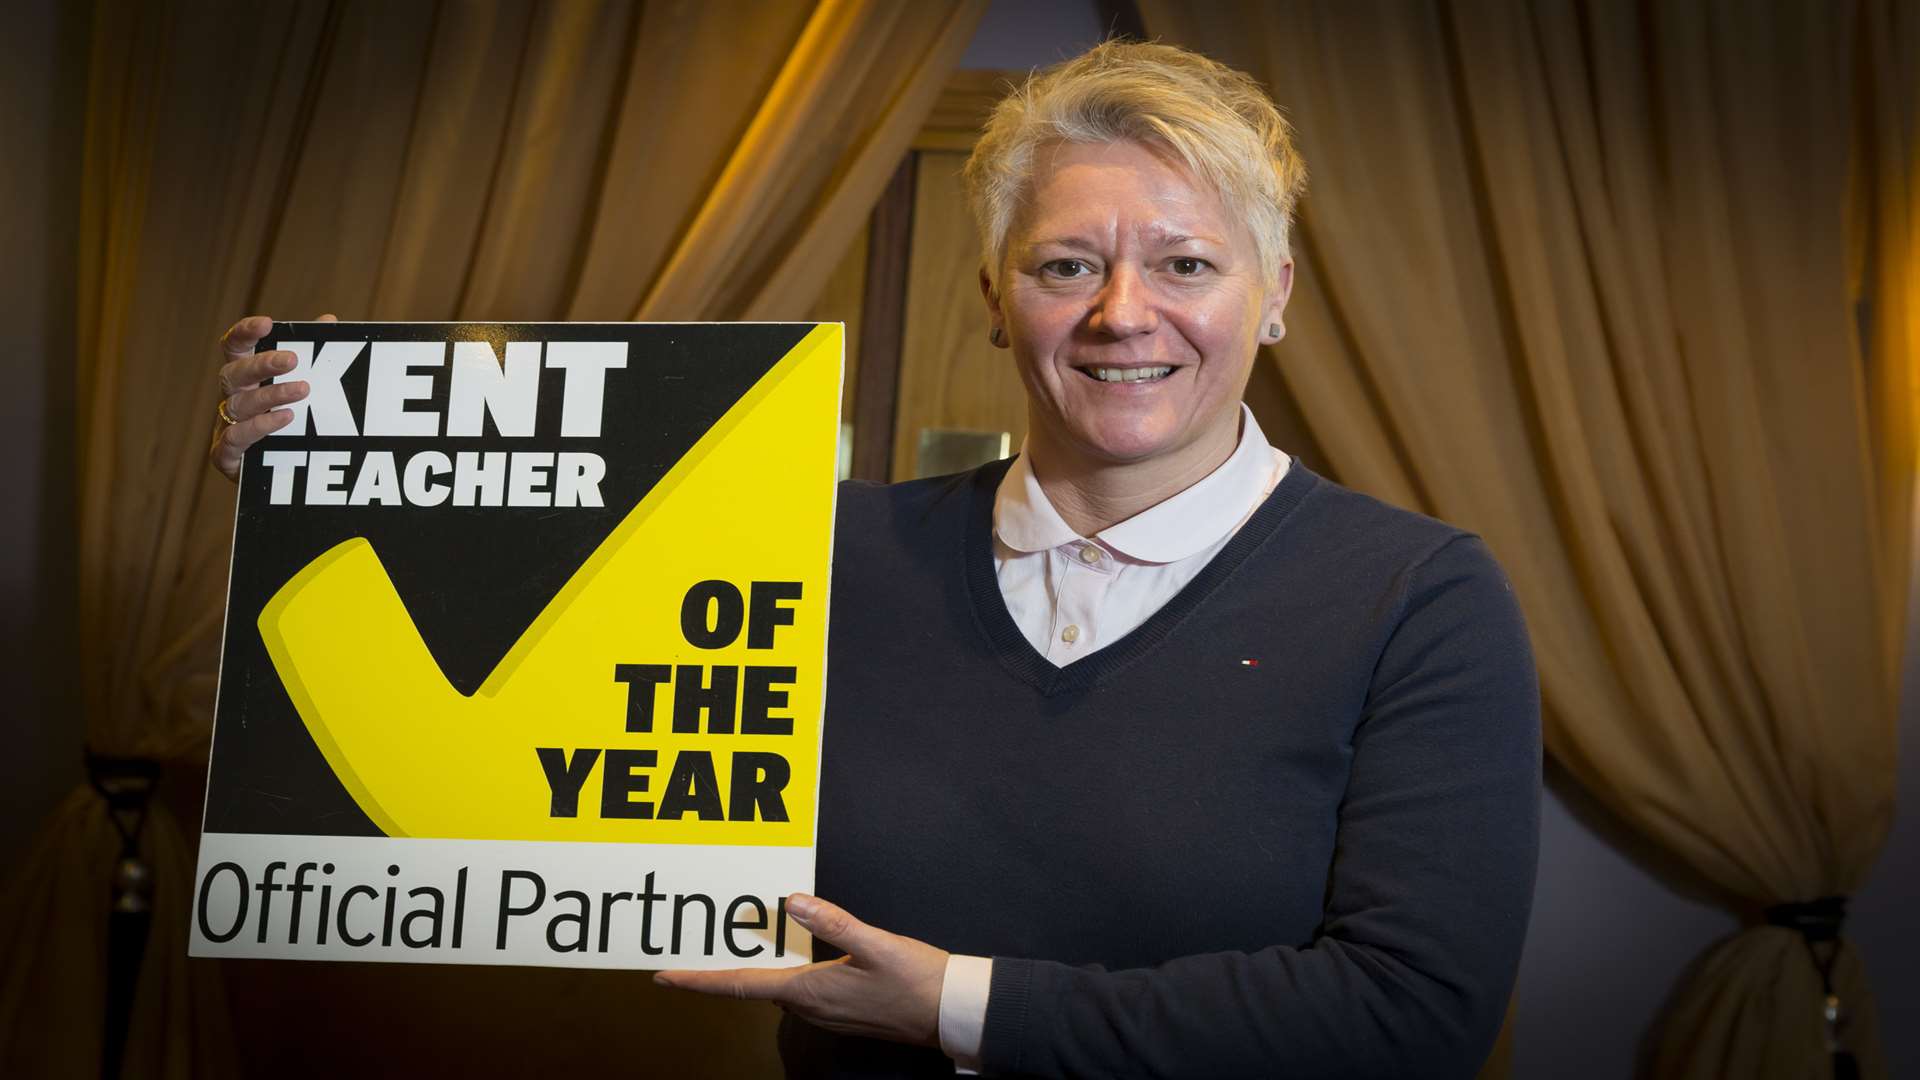 Clare Maclean-Bell of Kent Sport, which is supporting the Kent Teacher of the Year Awards 2018.